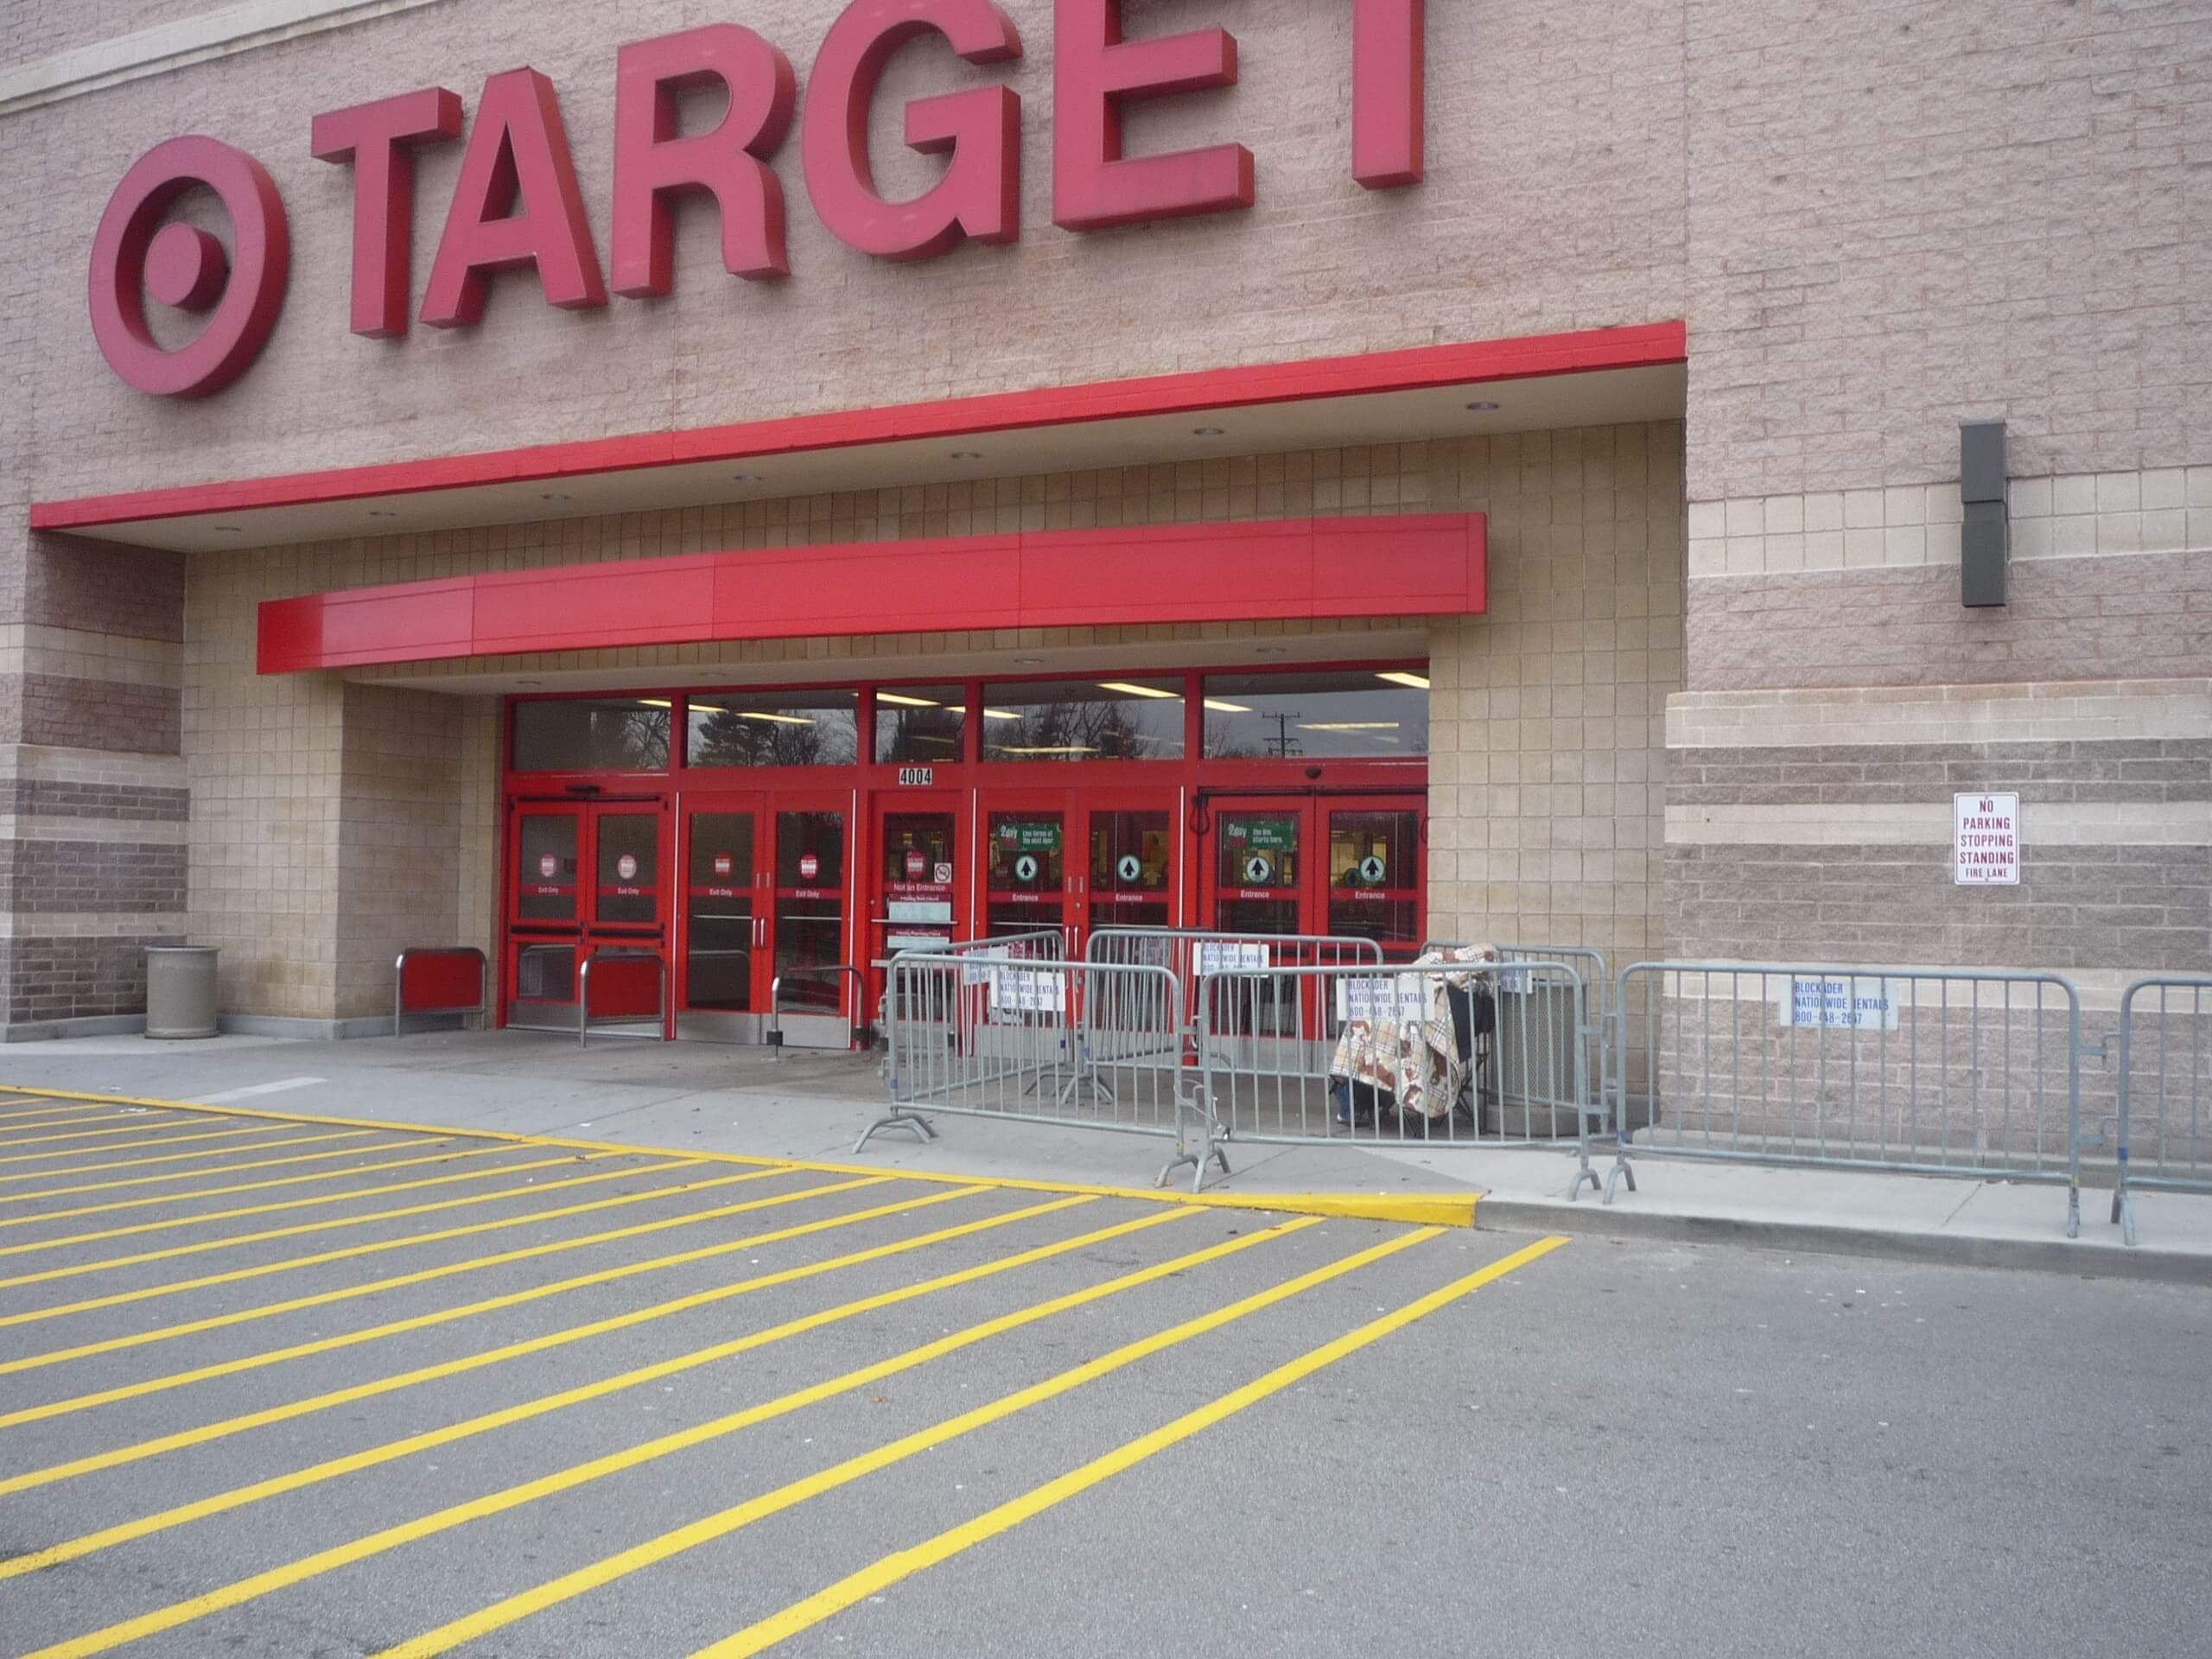 A Target Retail Supply Store with steel barriers